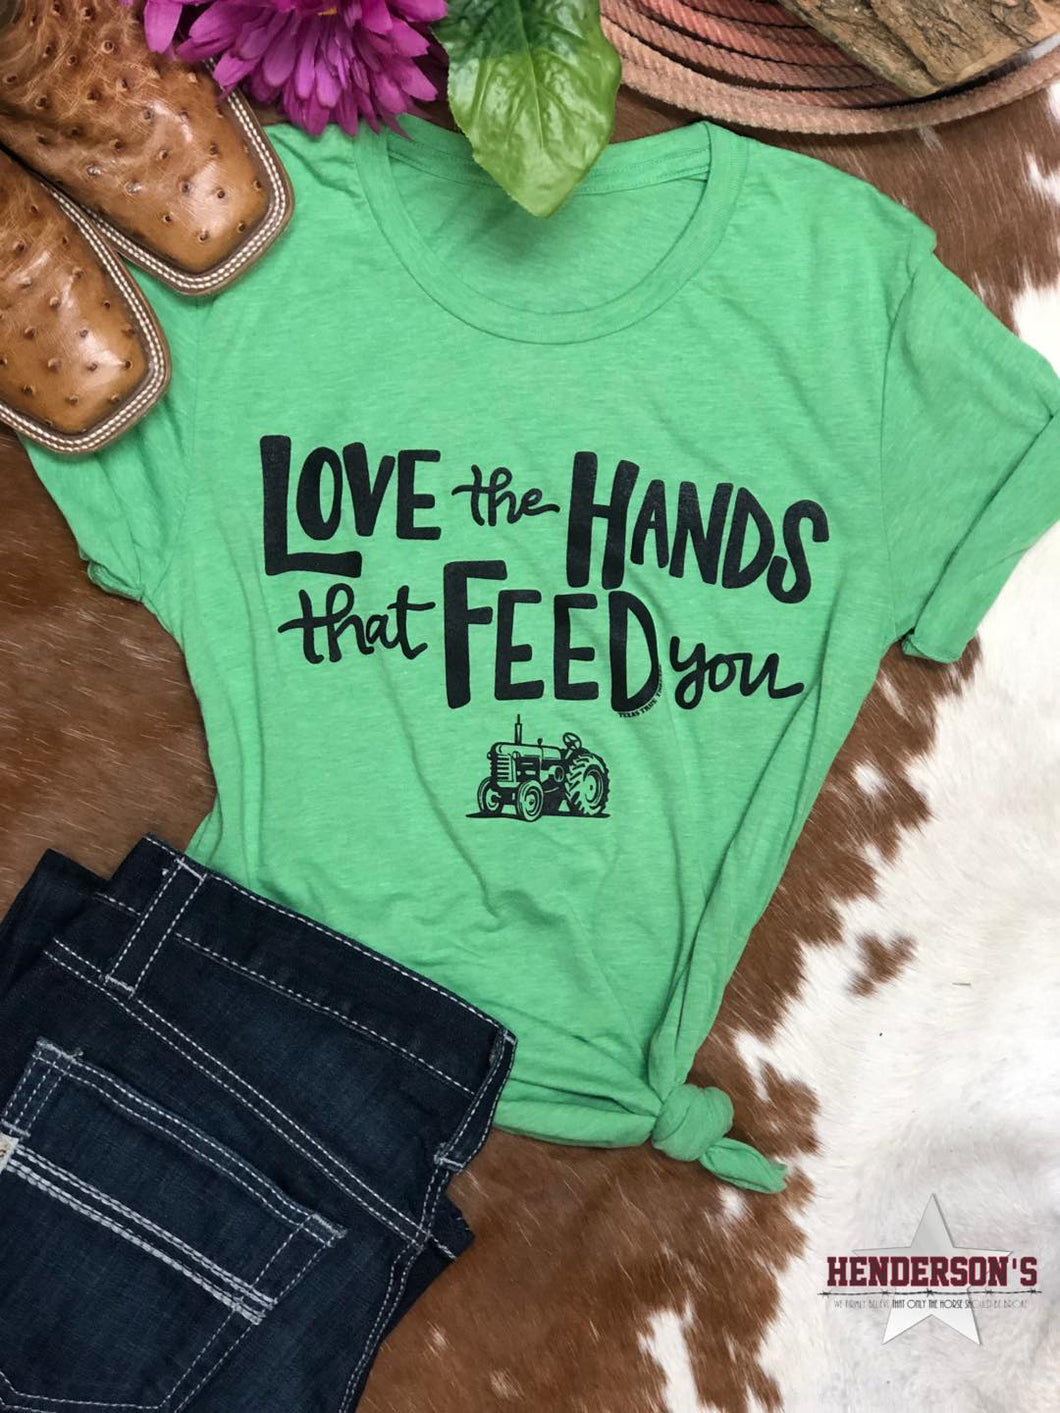 Love The Hands Tee - Henderson's Western Store